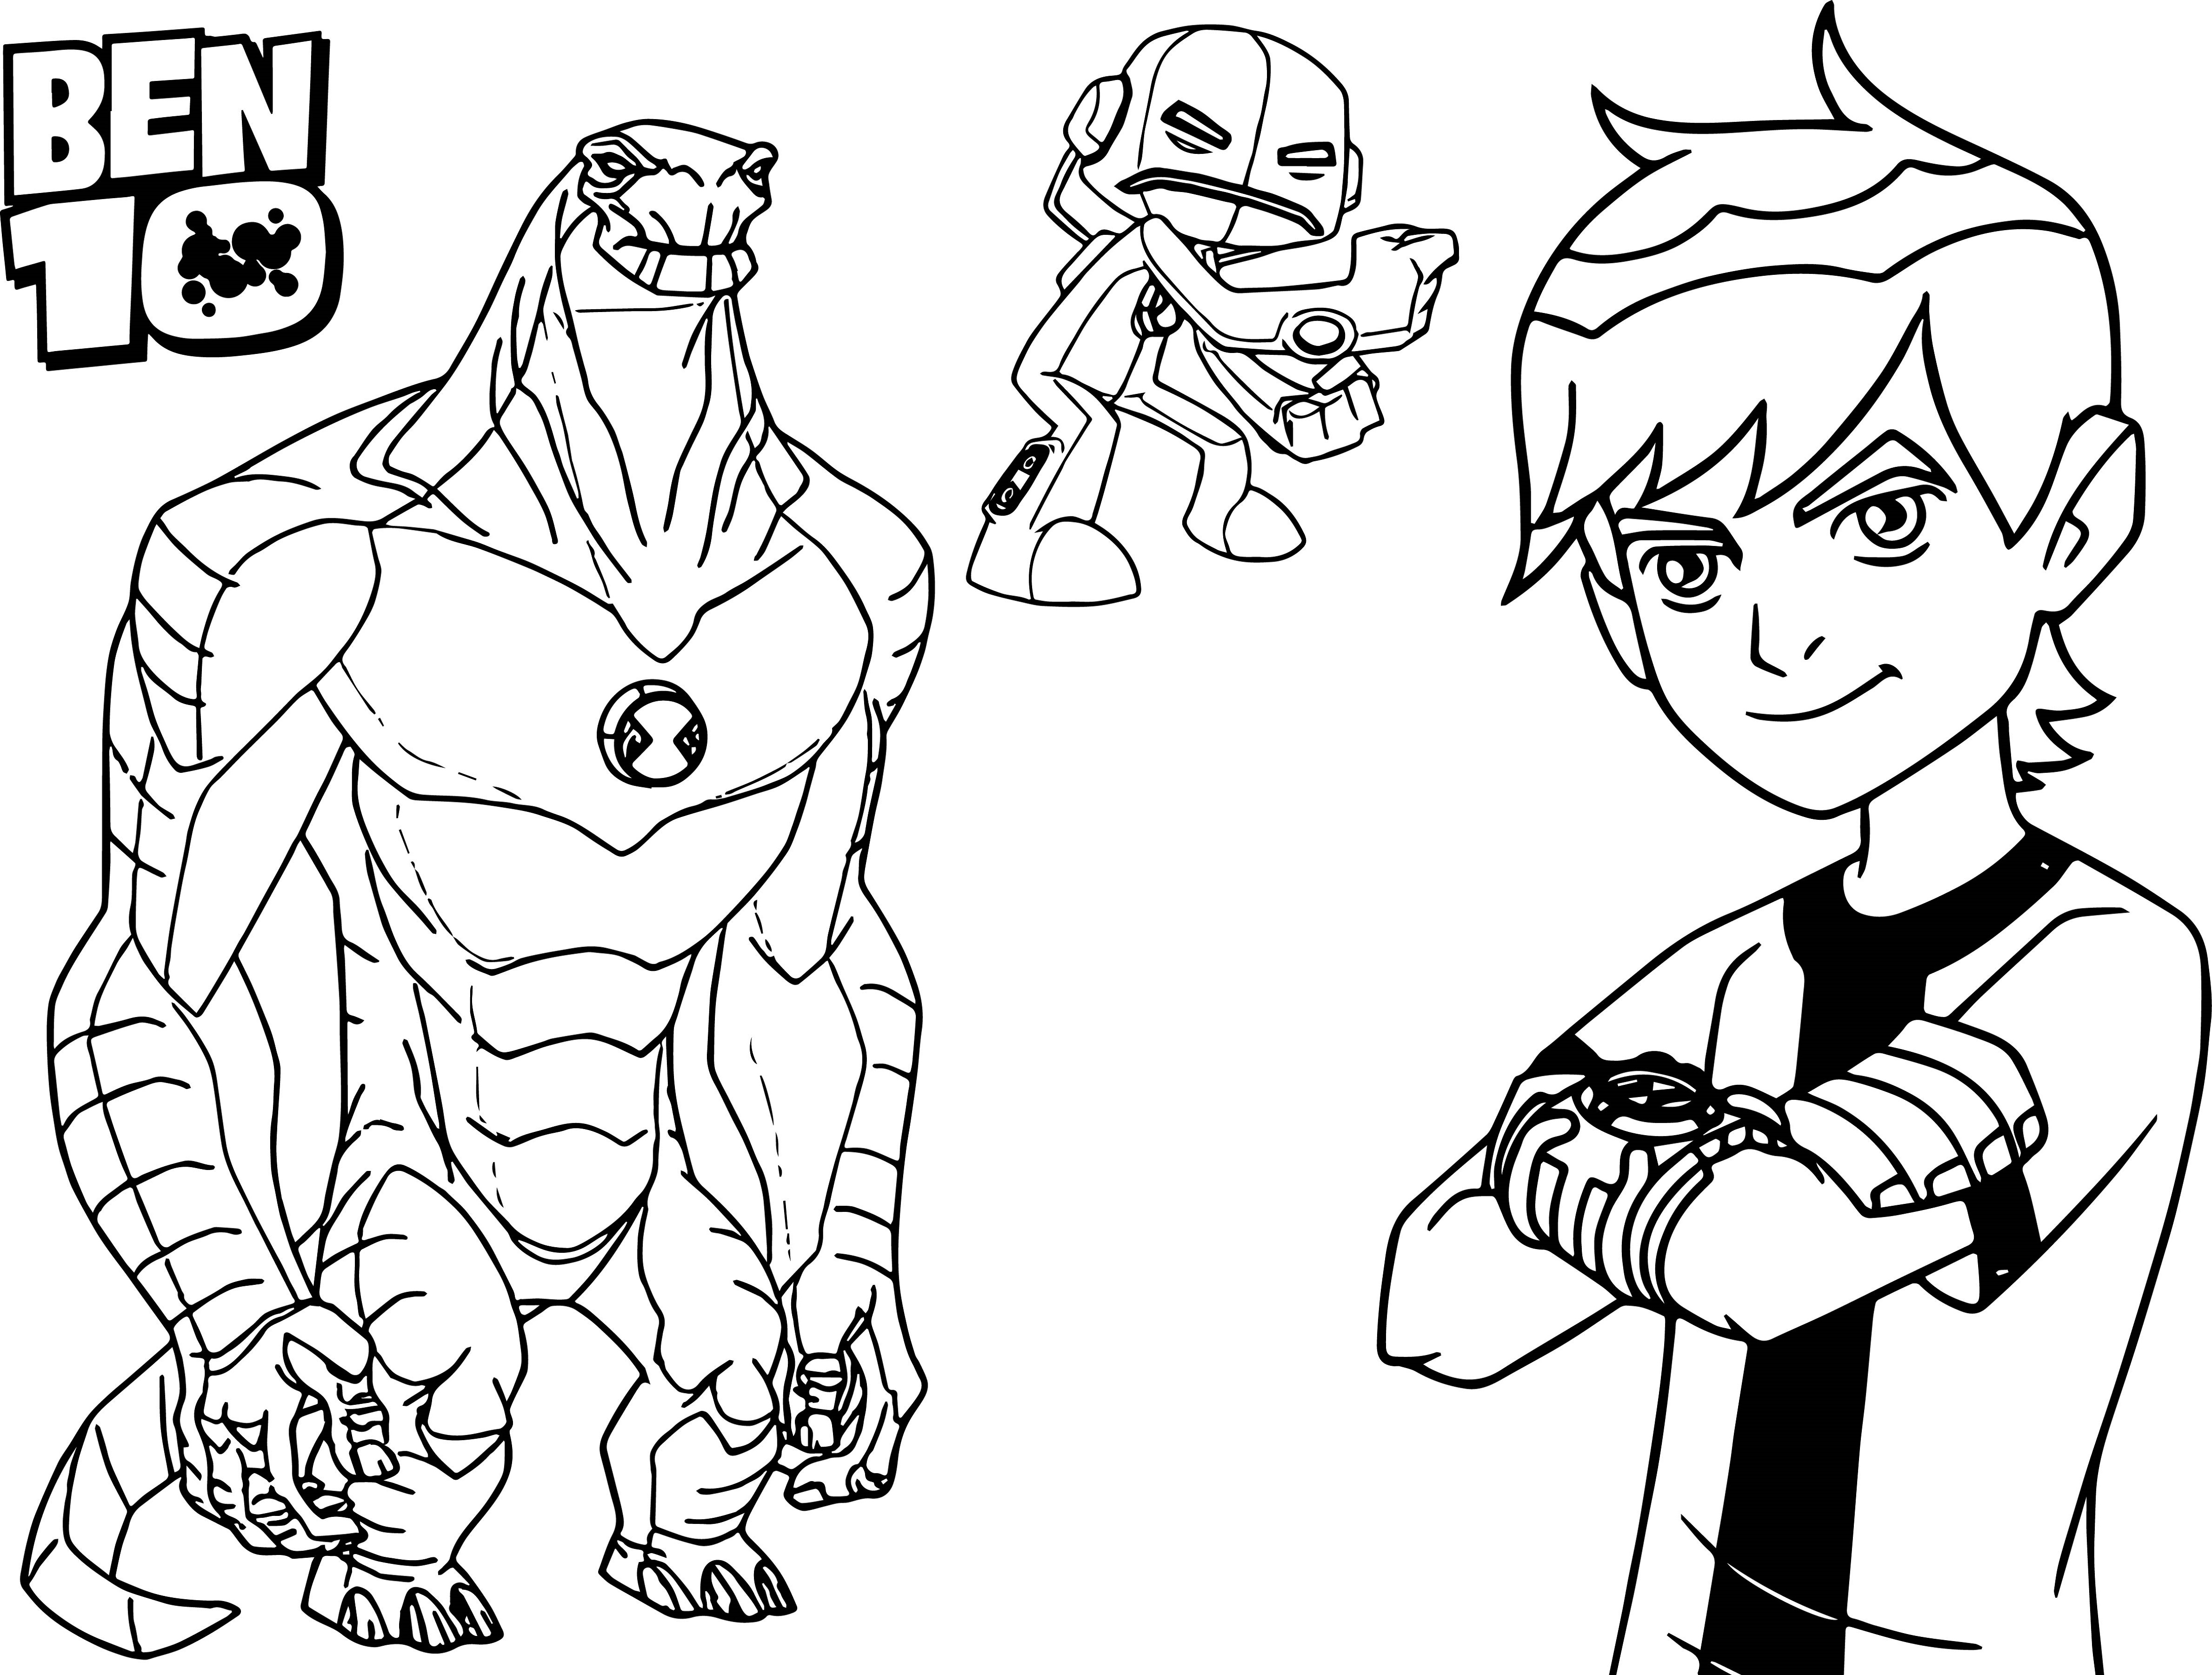 Ben 10 Coloring Pages Free